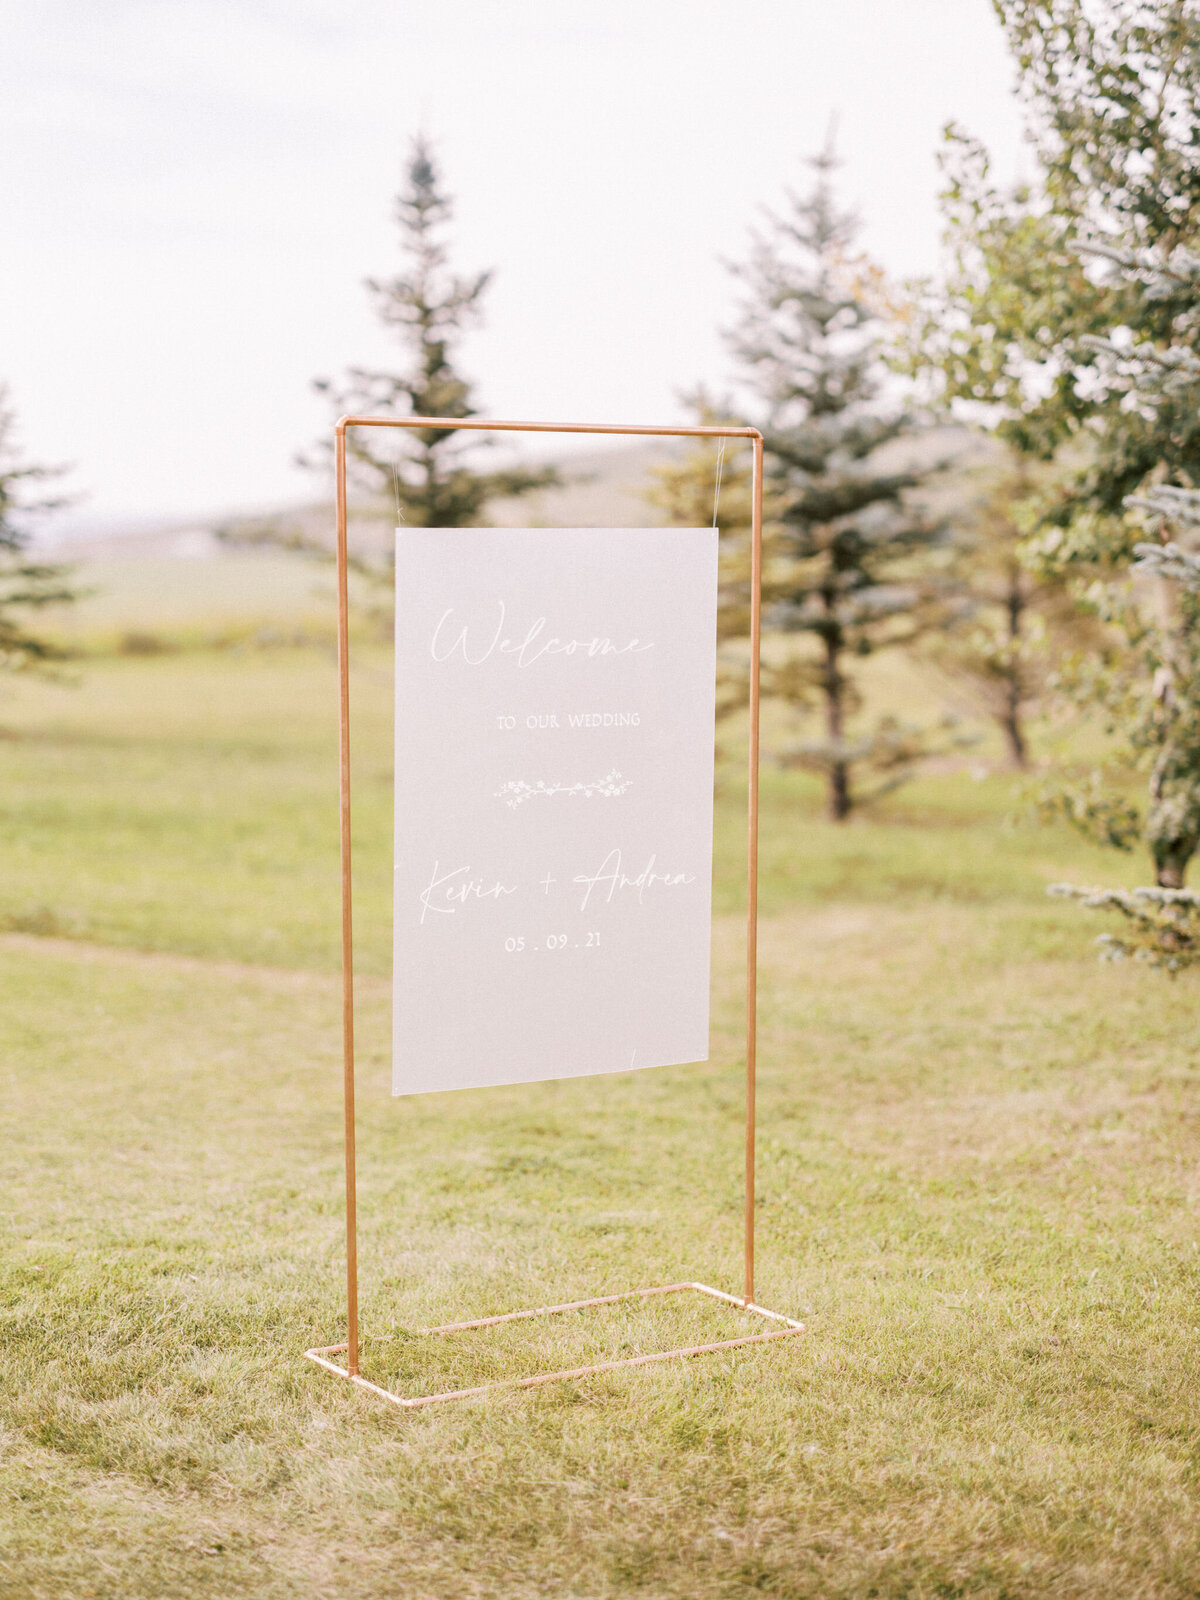 calgary-wedding-welcome-sign-copper-arch